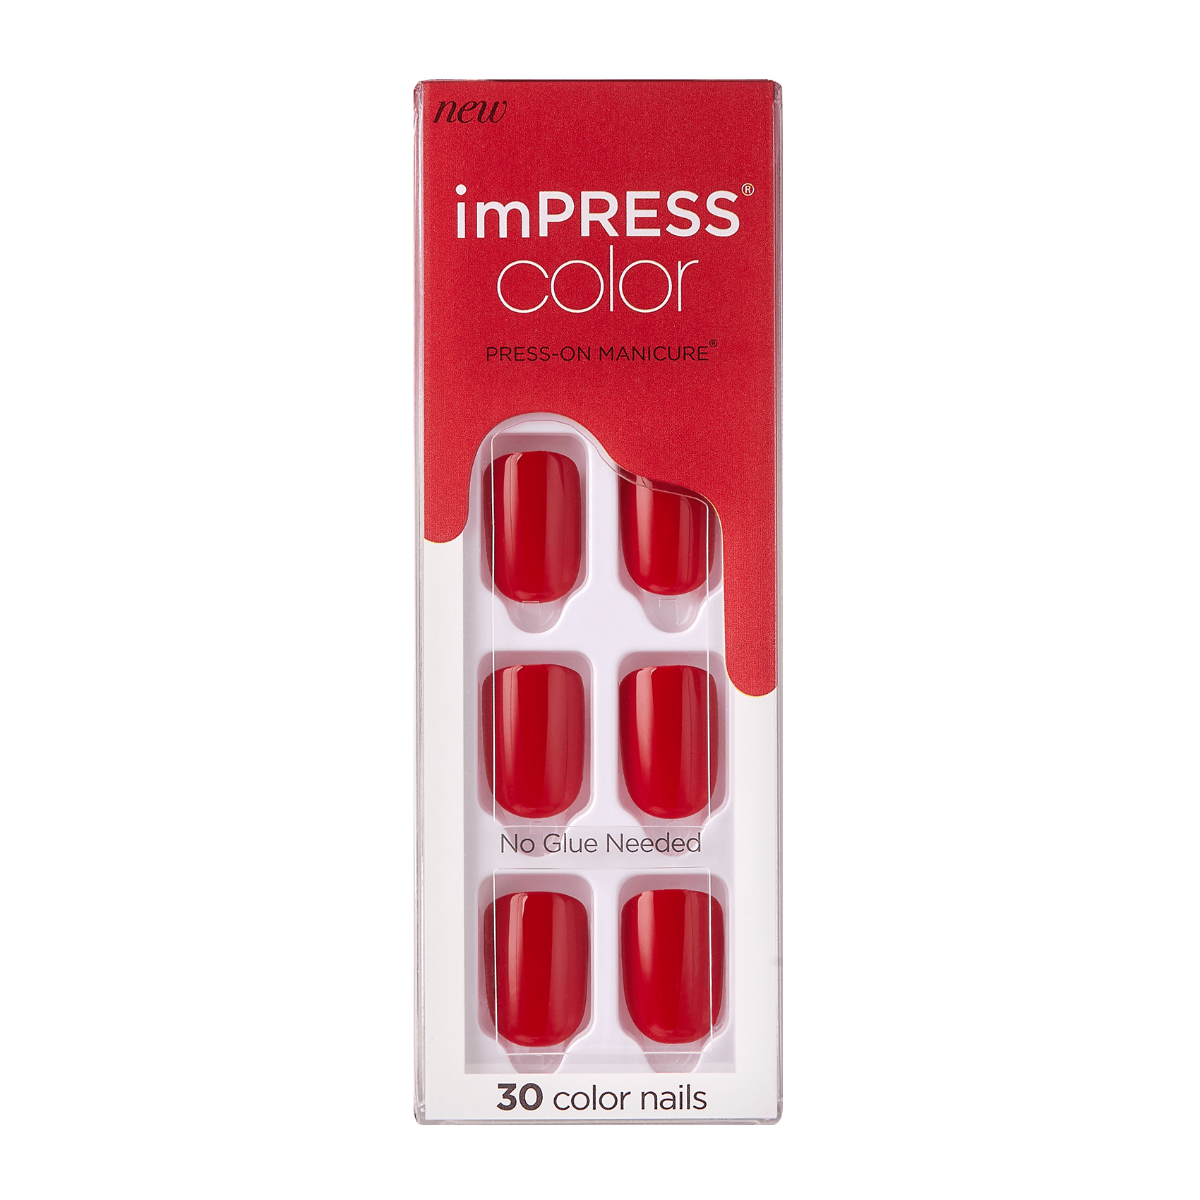 IMPRESS NAILS REDDY OR NOT - KISS